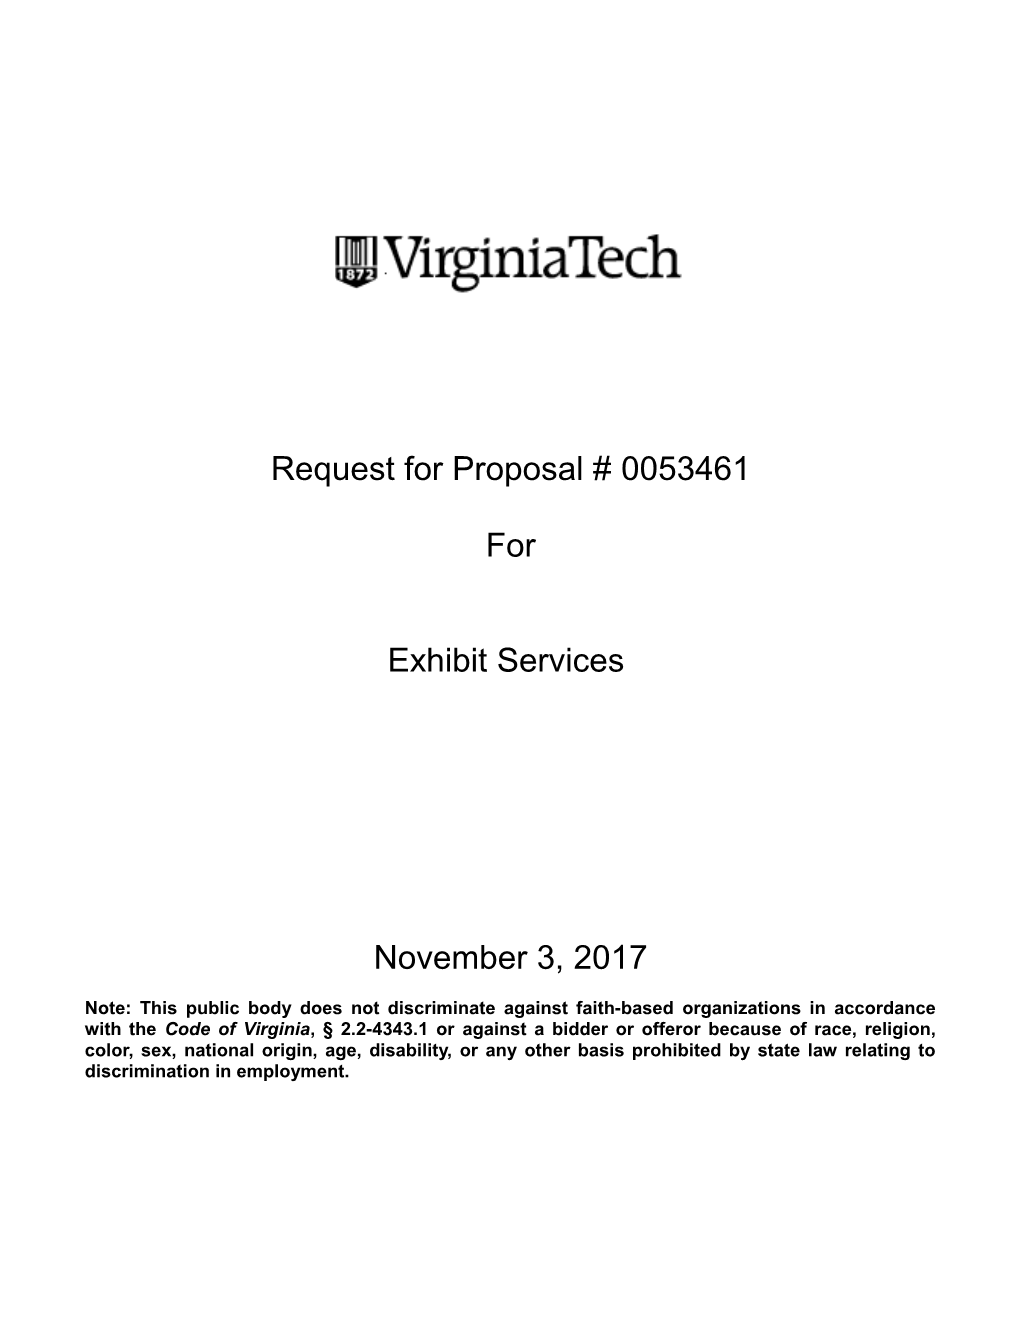 Request for Proposal #0053461